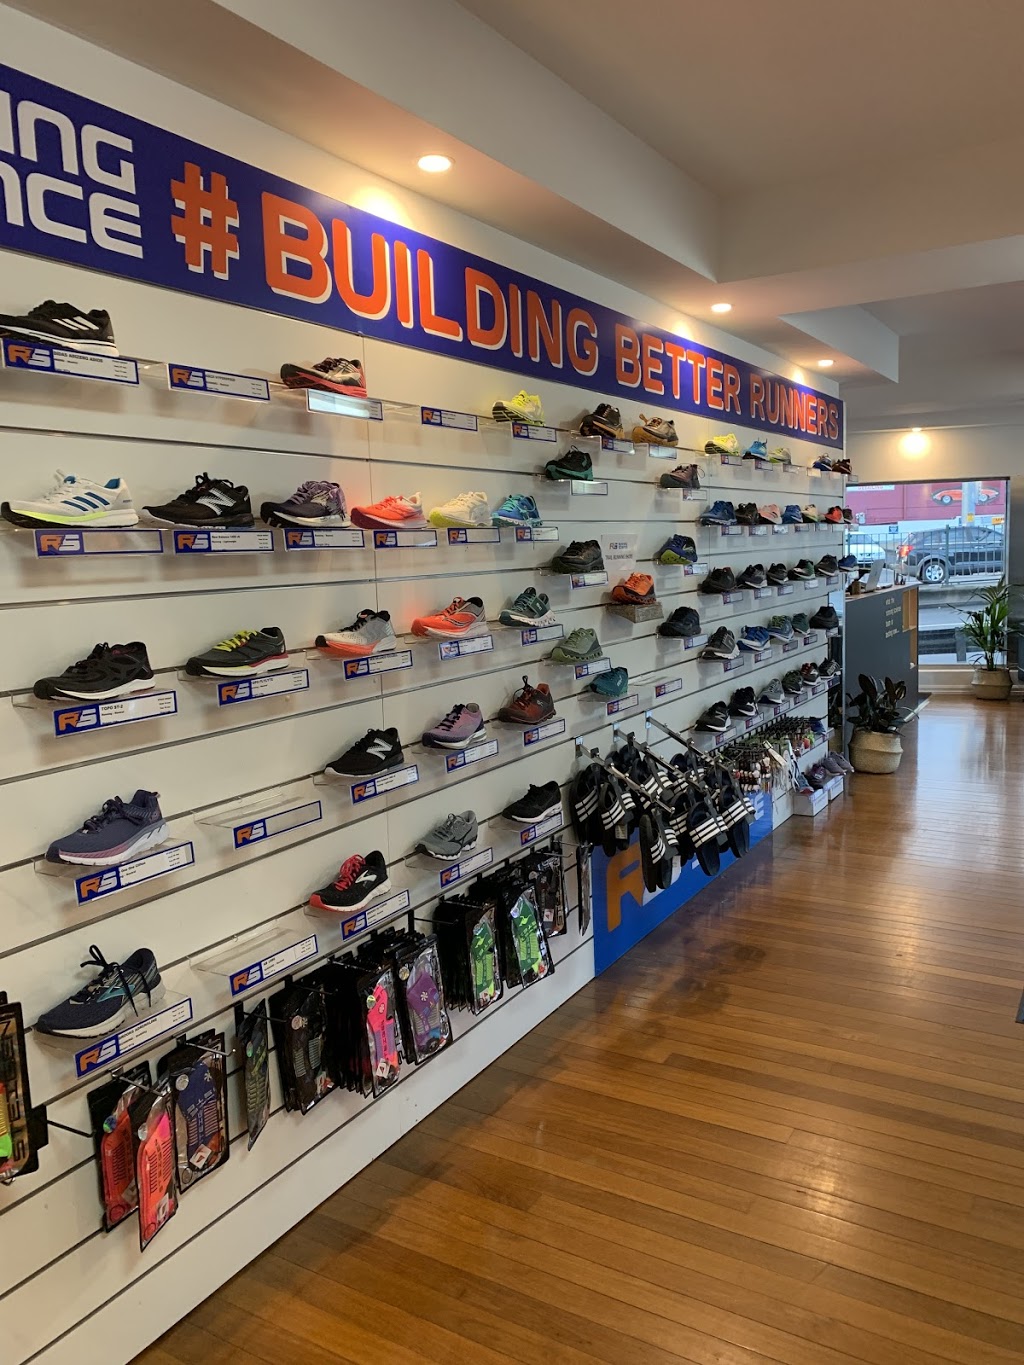 Running Science Rozelle | shoe store | 186 Victoria Rd, Rozelle NSW 2039, Australia | 0298100032 OR +61 2 9810 0032